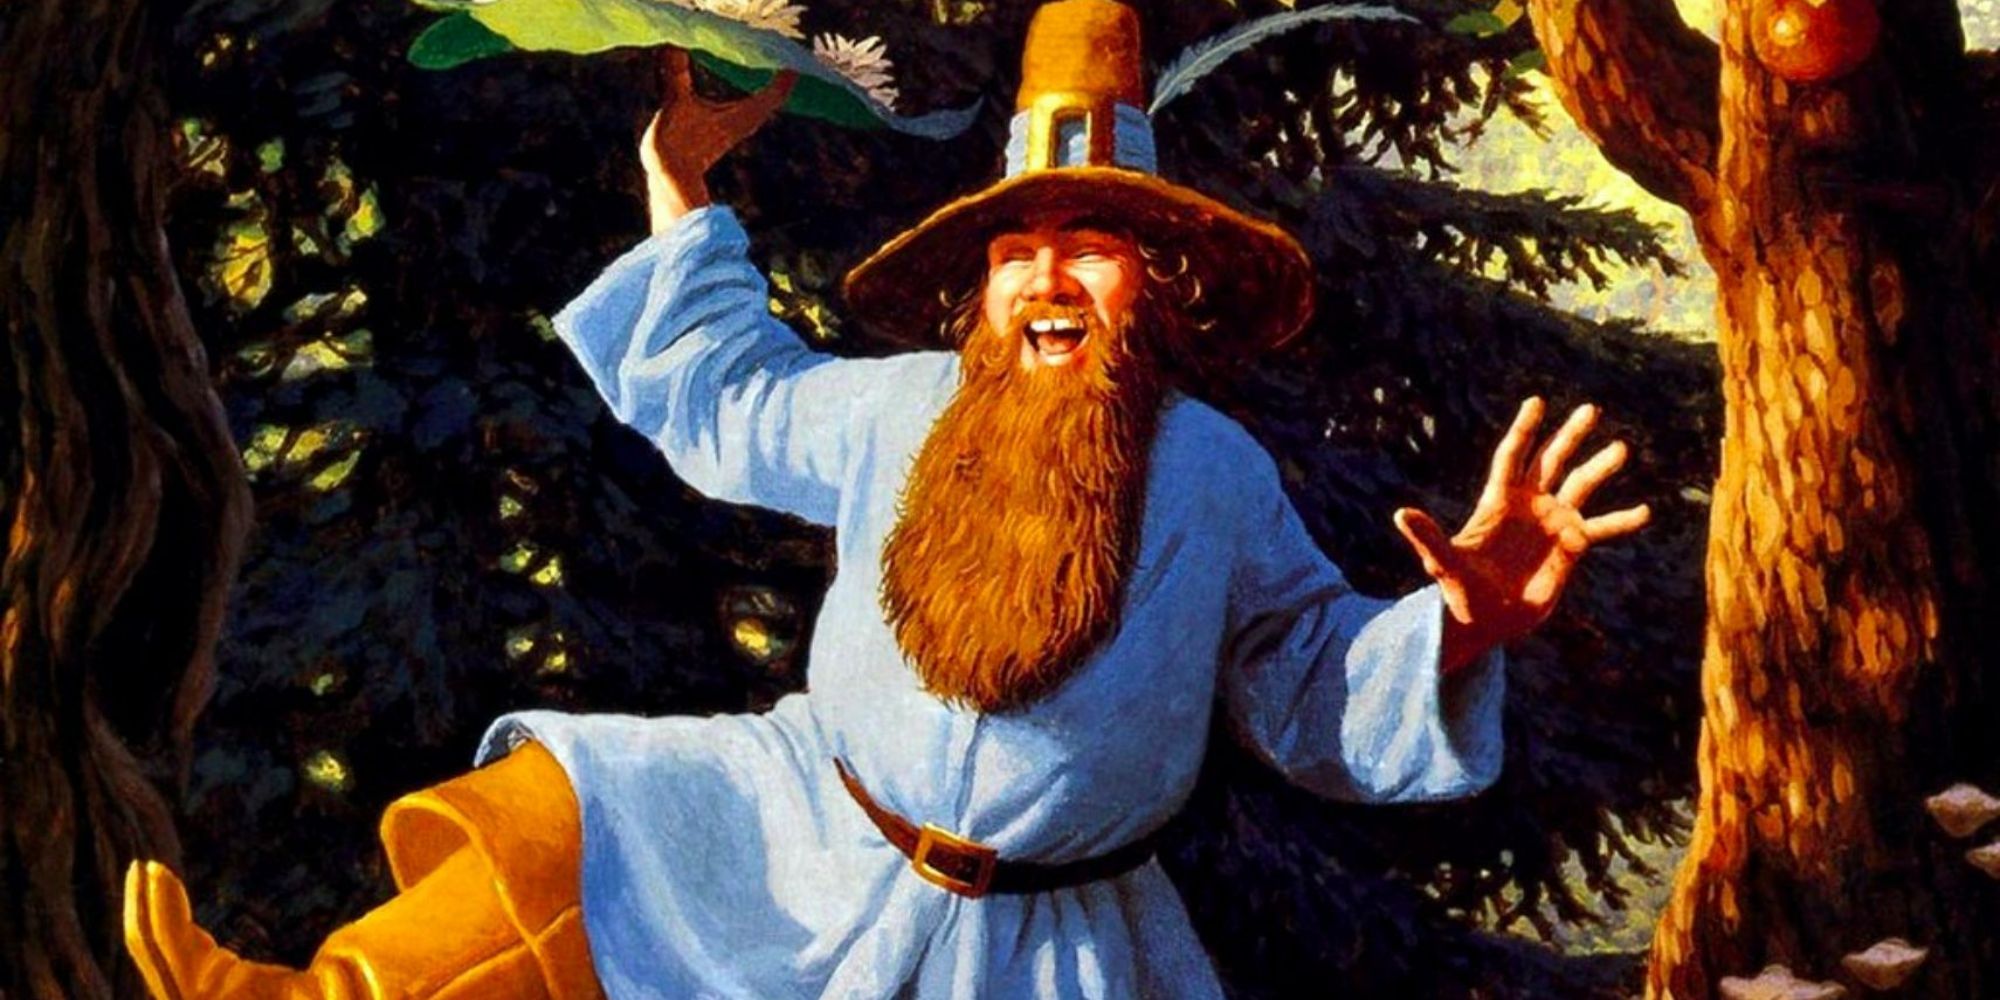 Tom Bombadil from The Lord of the Rings.